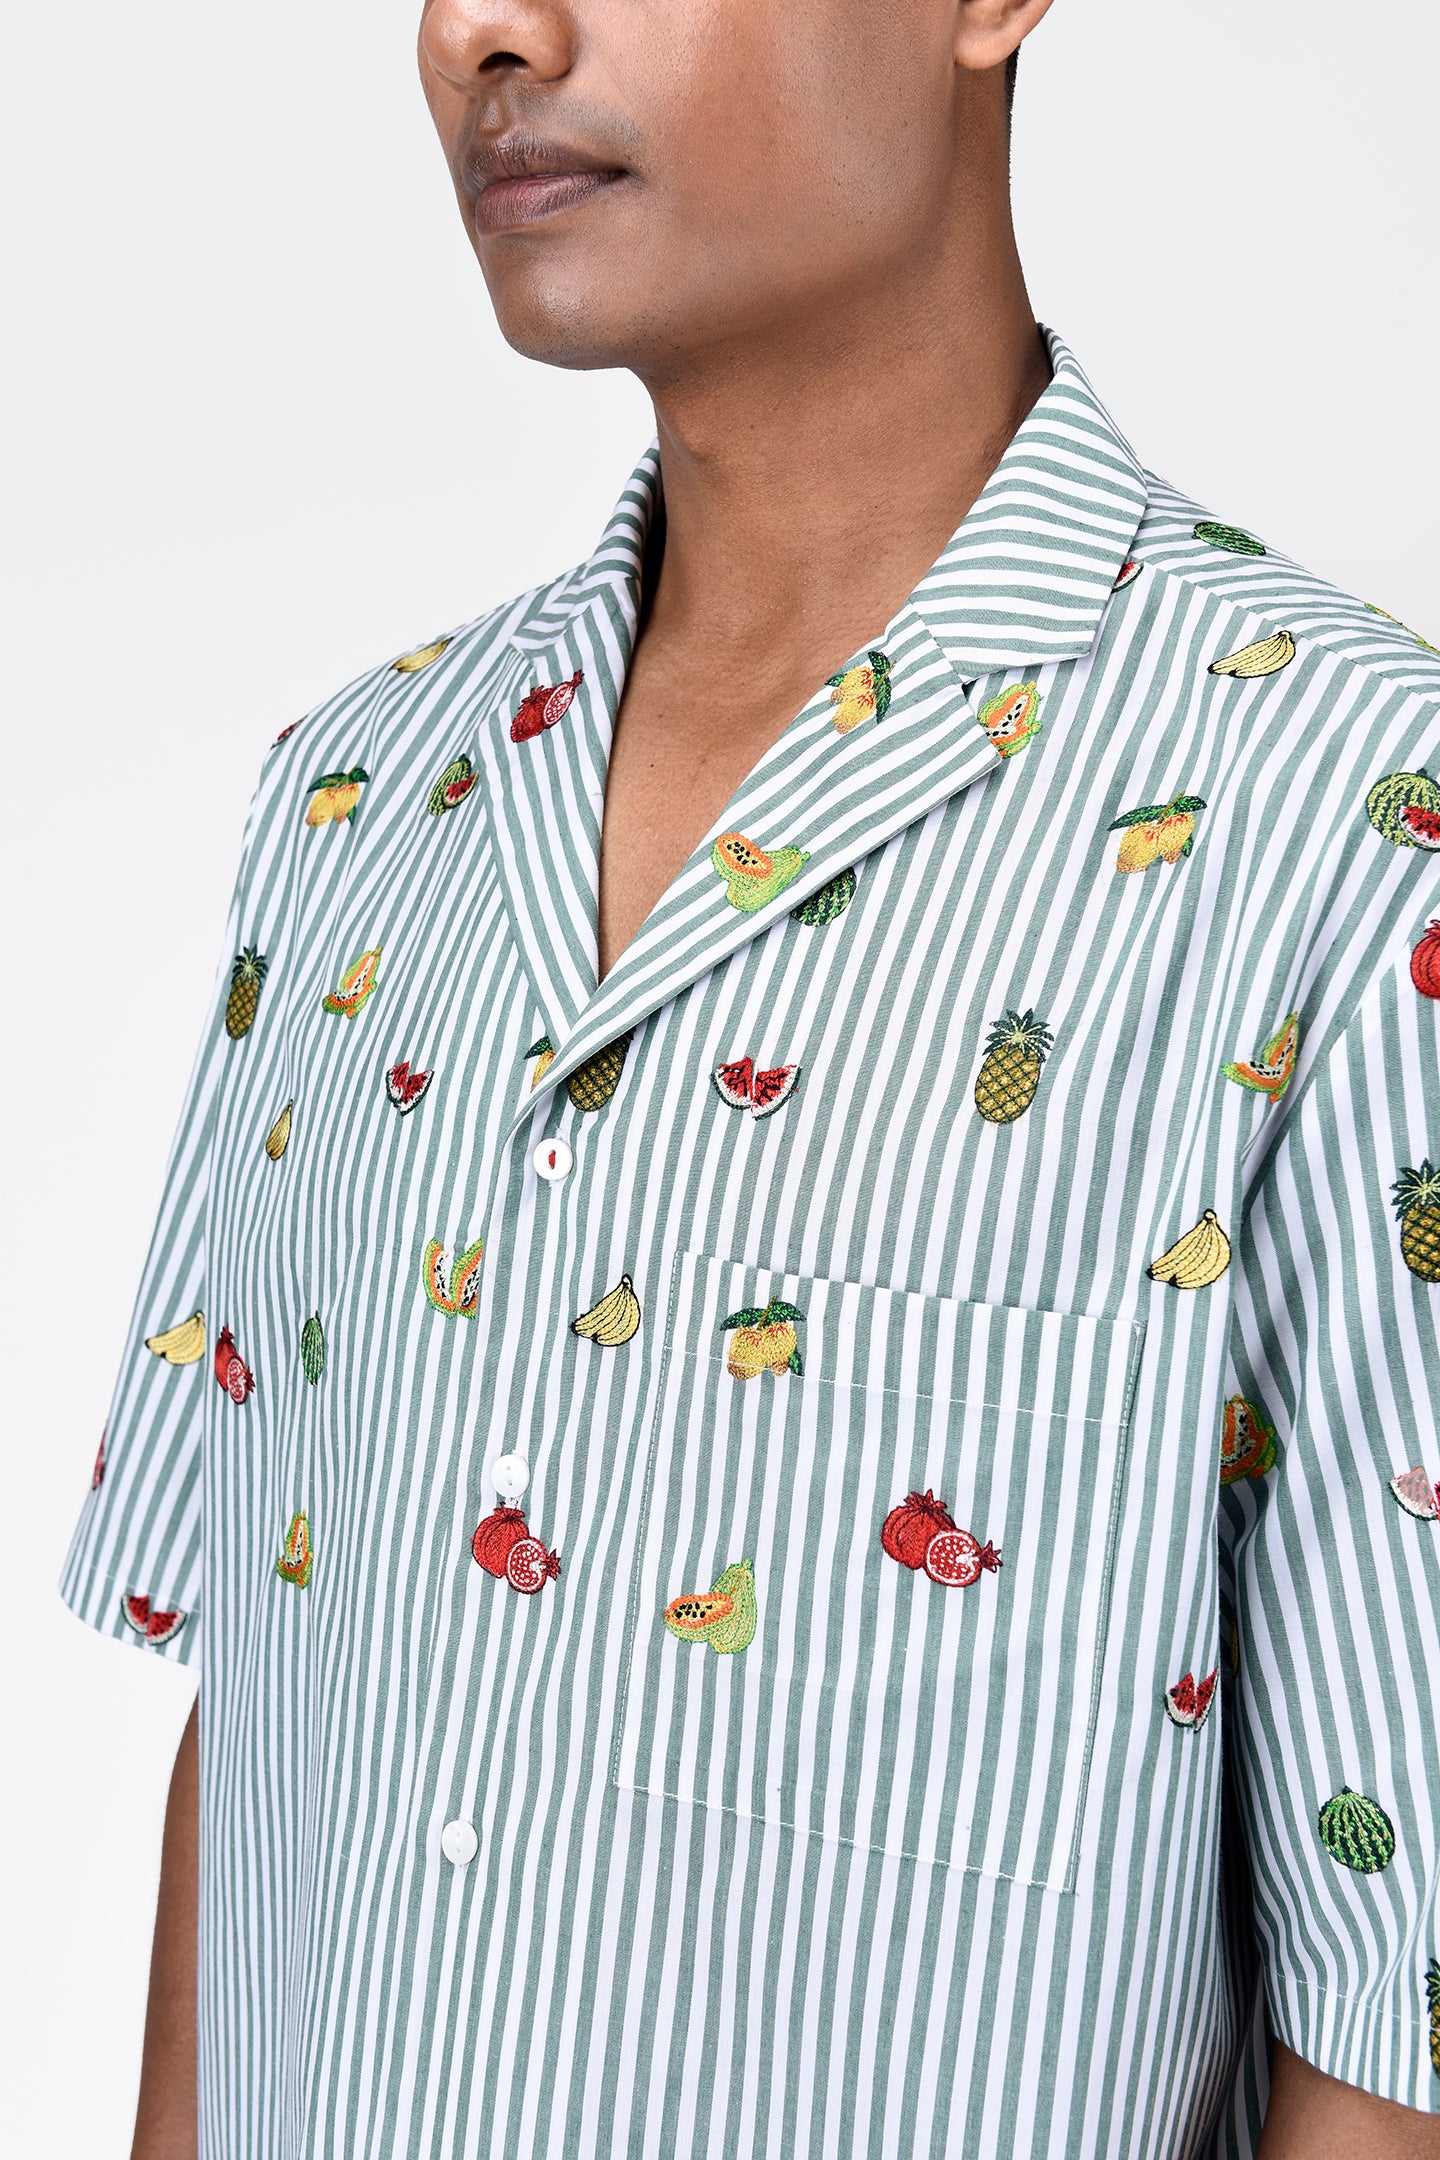 Fruit Motifs Embroidery Easy Fit Men's Half Sleeve Shirt